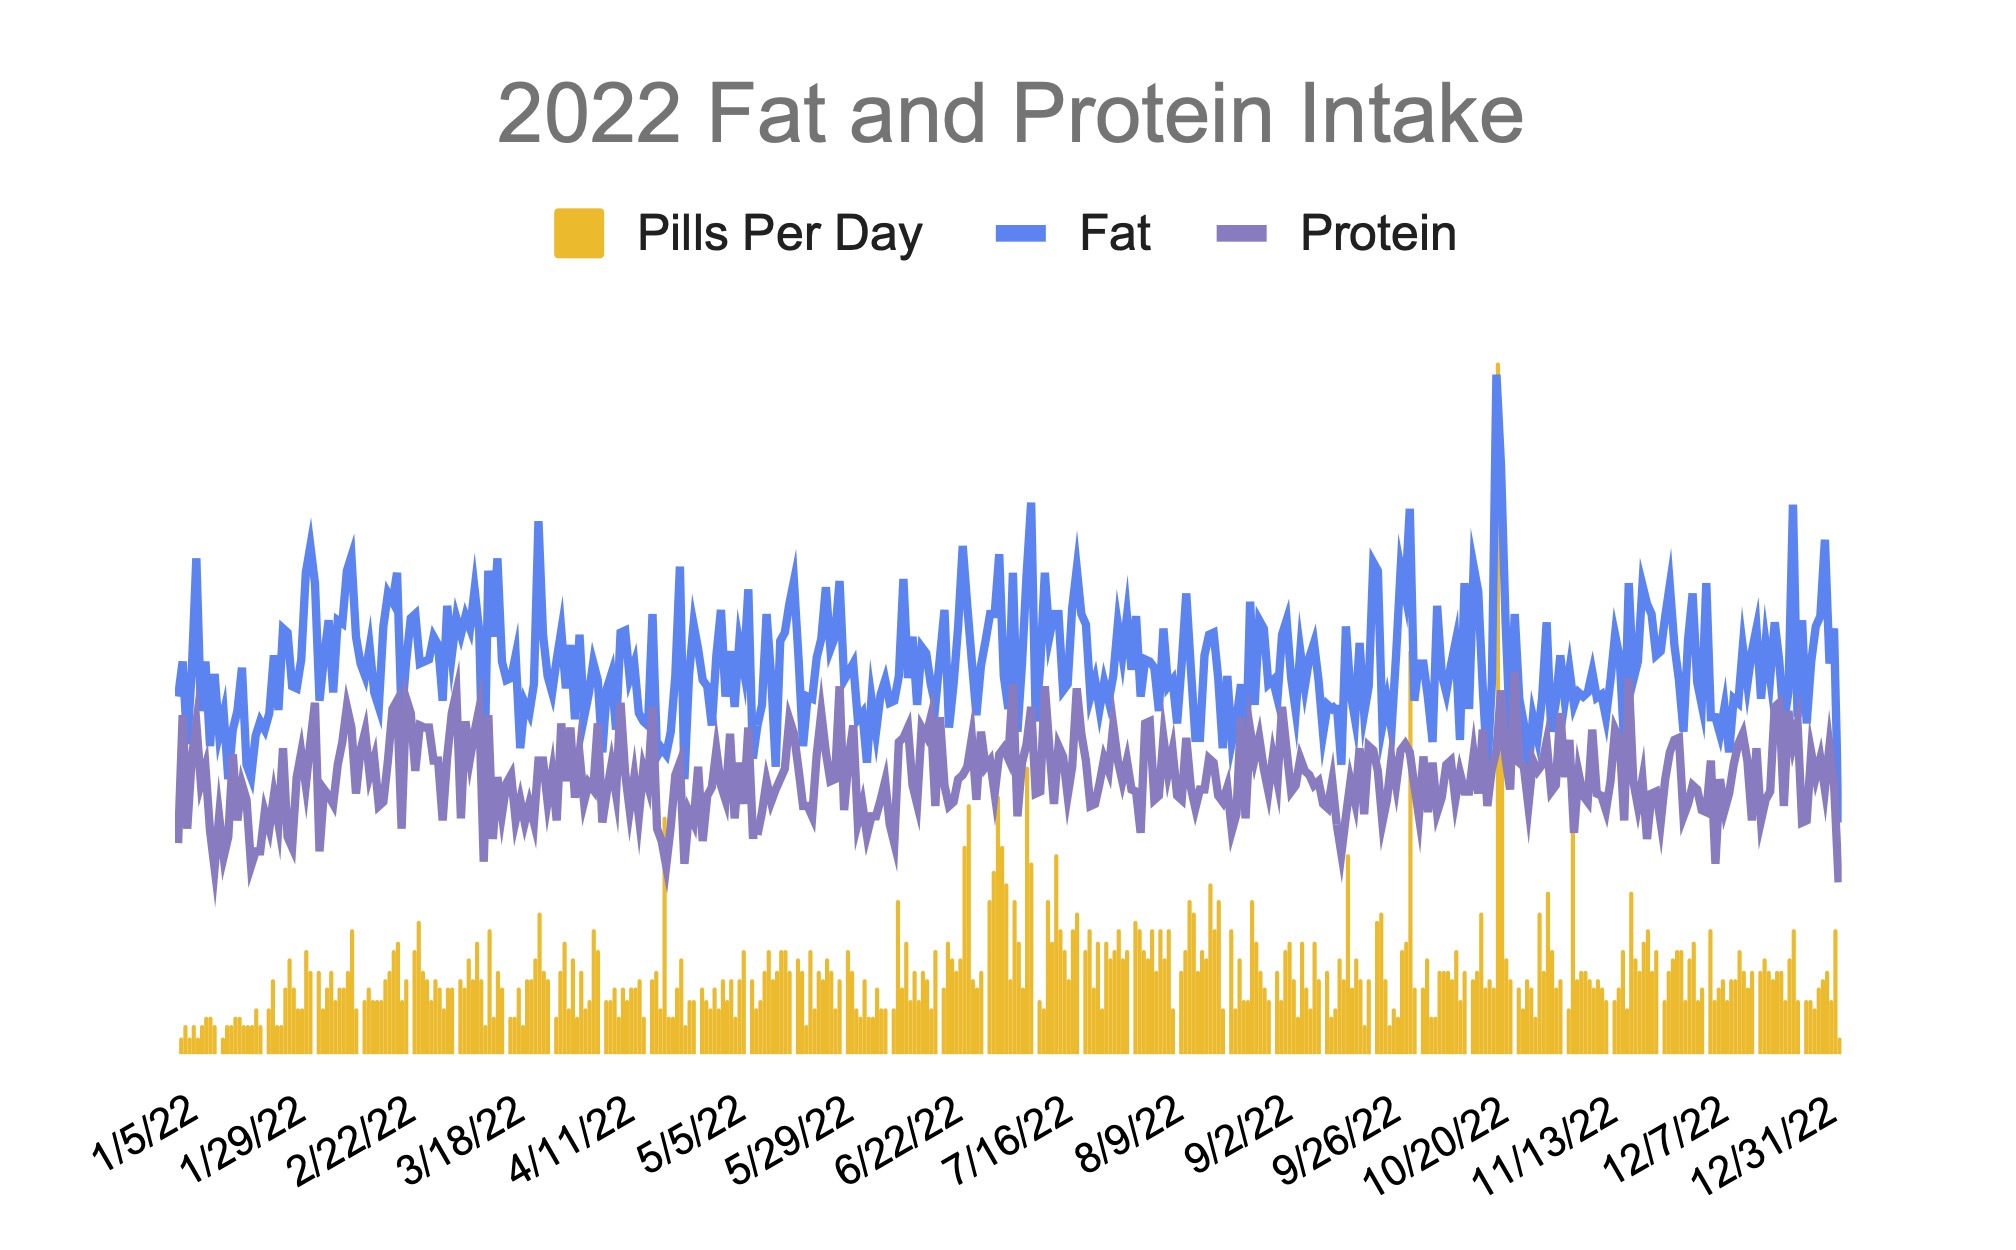 Displaying lines showing the relative amounts of fat and protein consumed throughout the year, plus the number of enzyme pills per day throughout 2022.